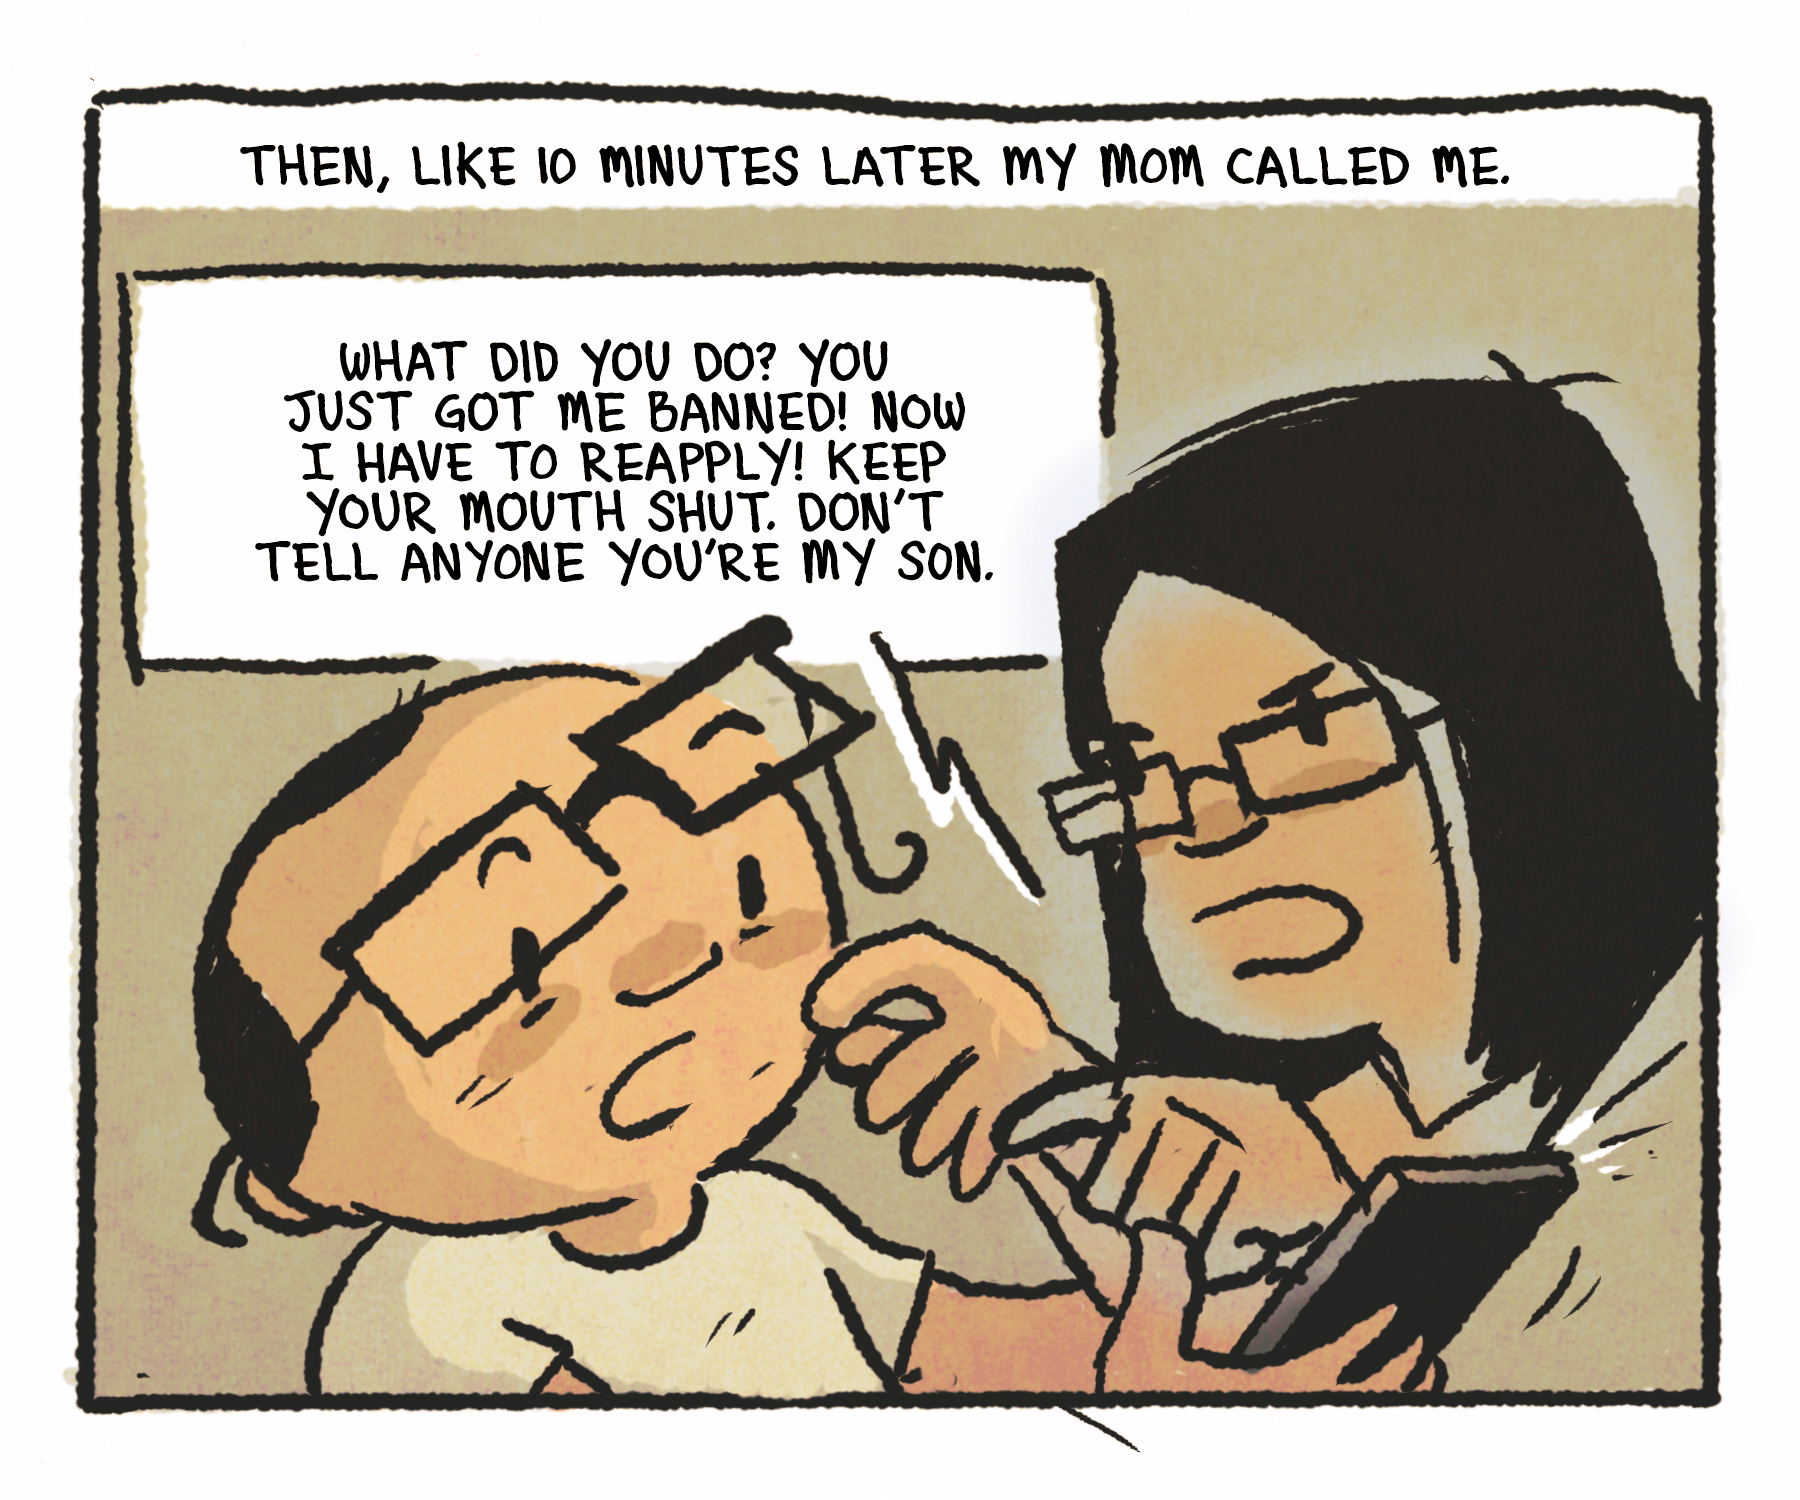 Comics panel: The man is being poked by his angry mother. Speech bubbles: "Then, like 10 minutes later my mom called me." "What did you do? You just got me banned! Now I have to reapply! Keep your mouth shut. Don't tell anyone you're my son."